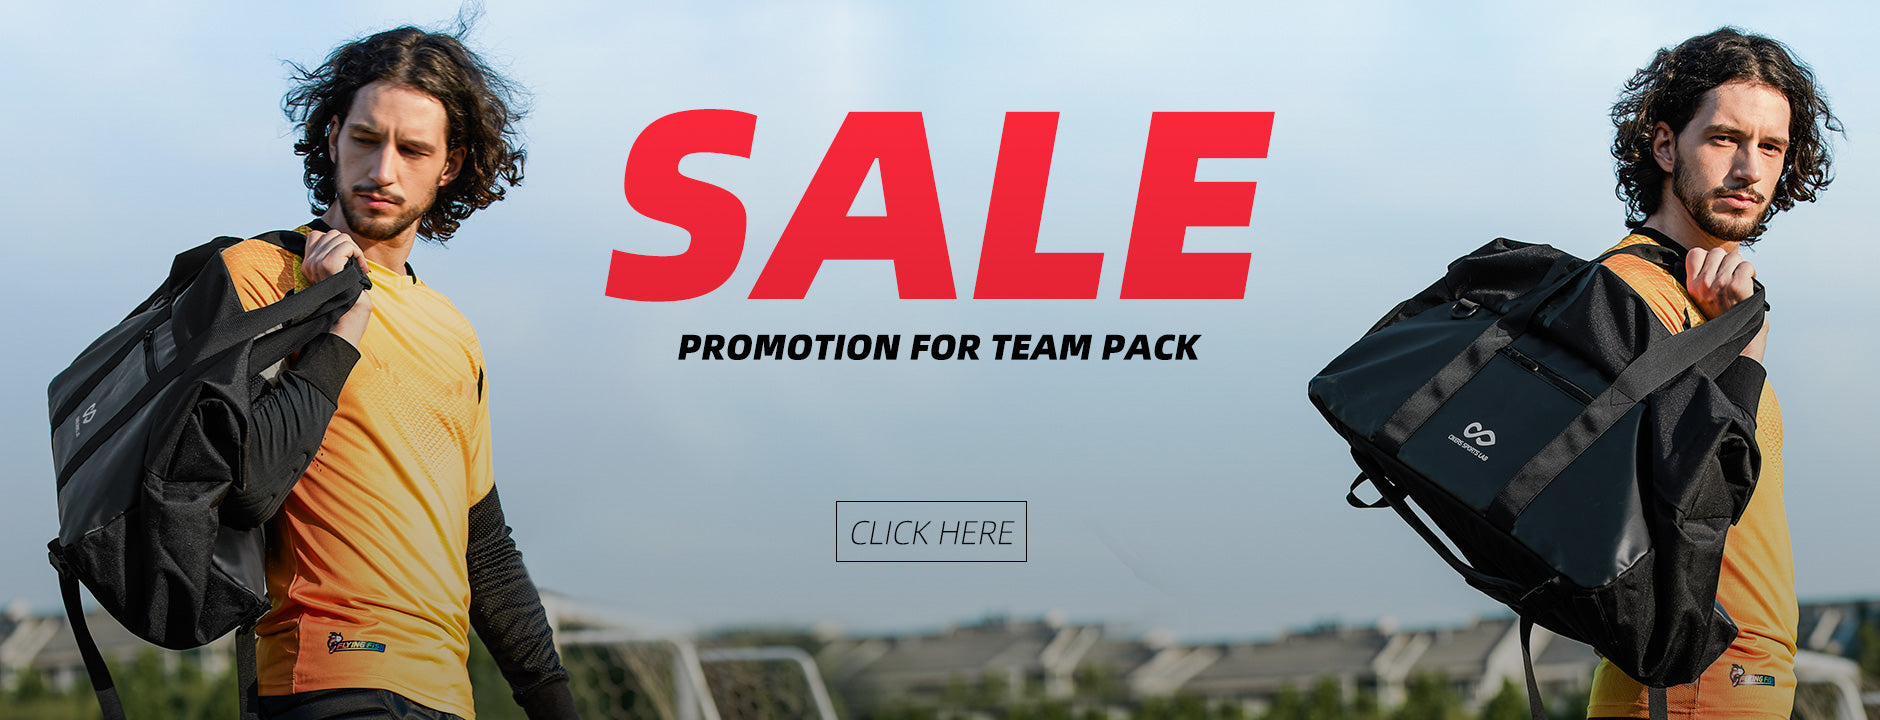 XTeamwear Promotion for Team Pack